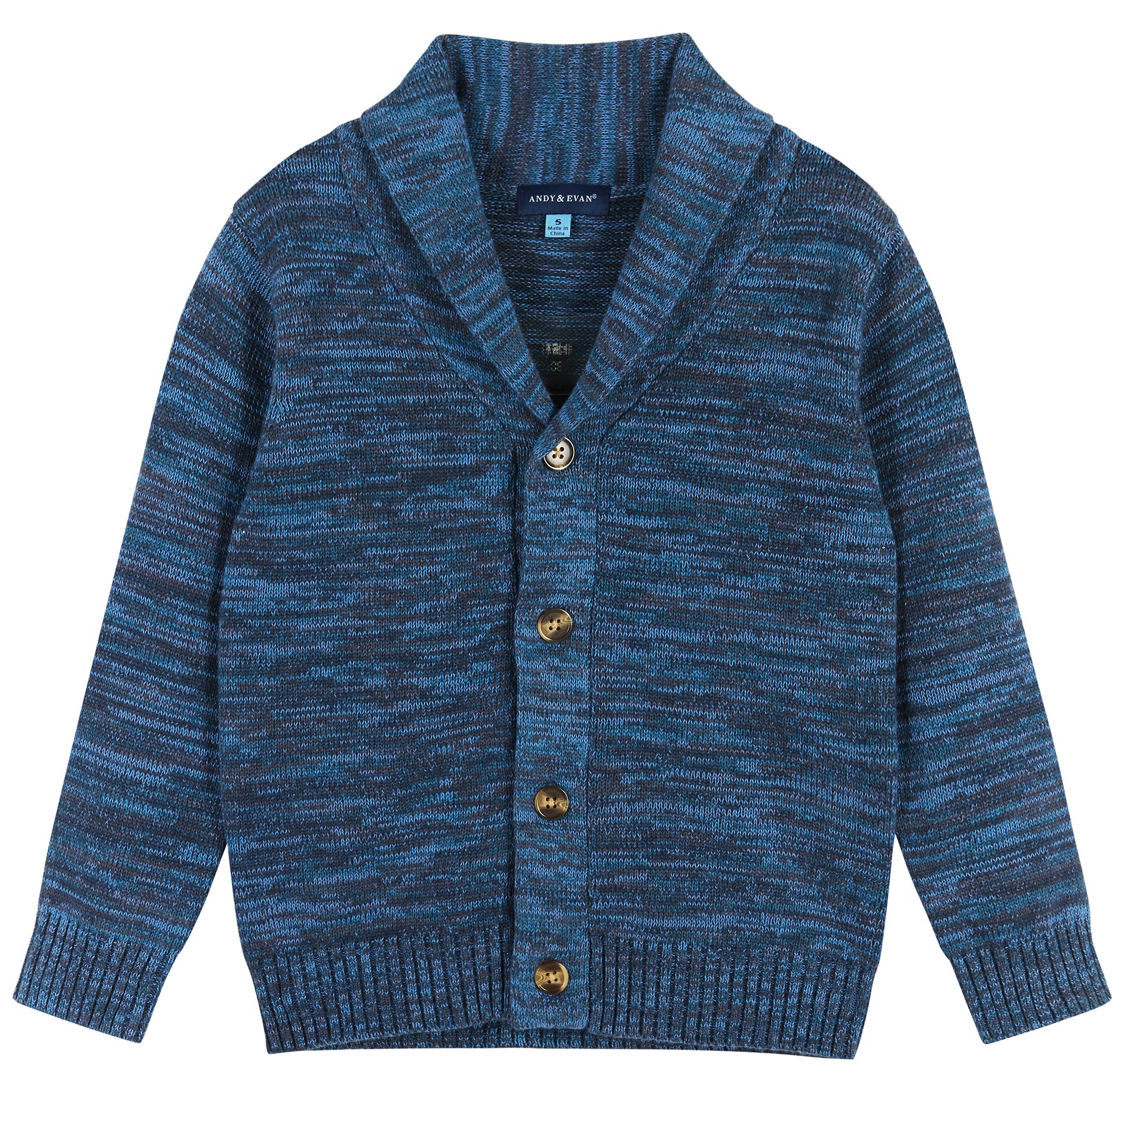 Andy & Evan Boys Multi Colored Marled Toggle Cardigan Set - Image 3 of 5